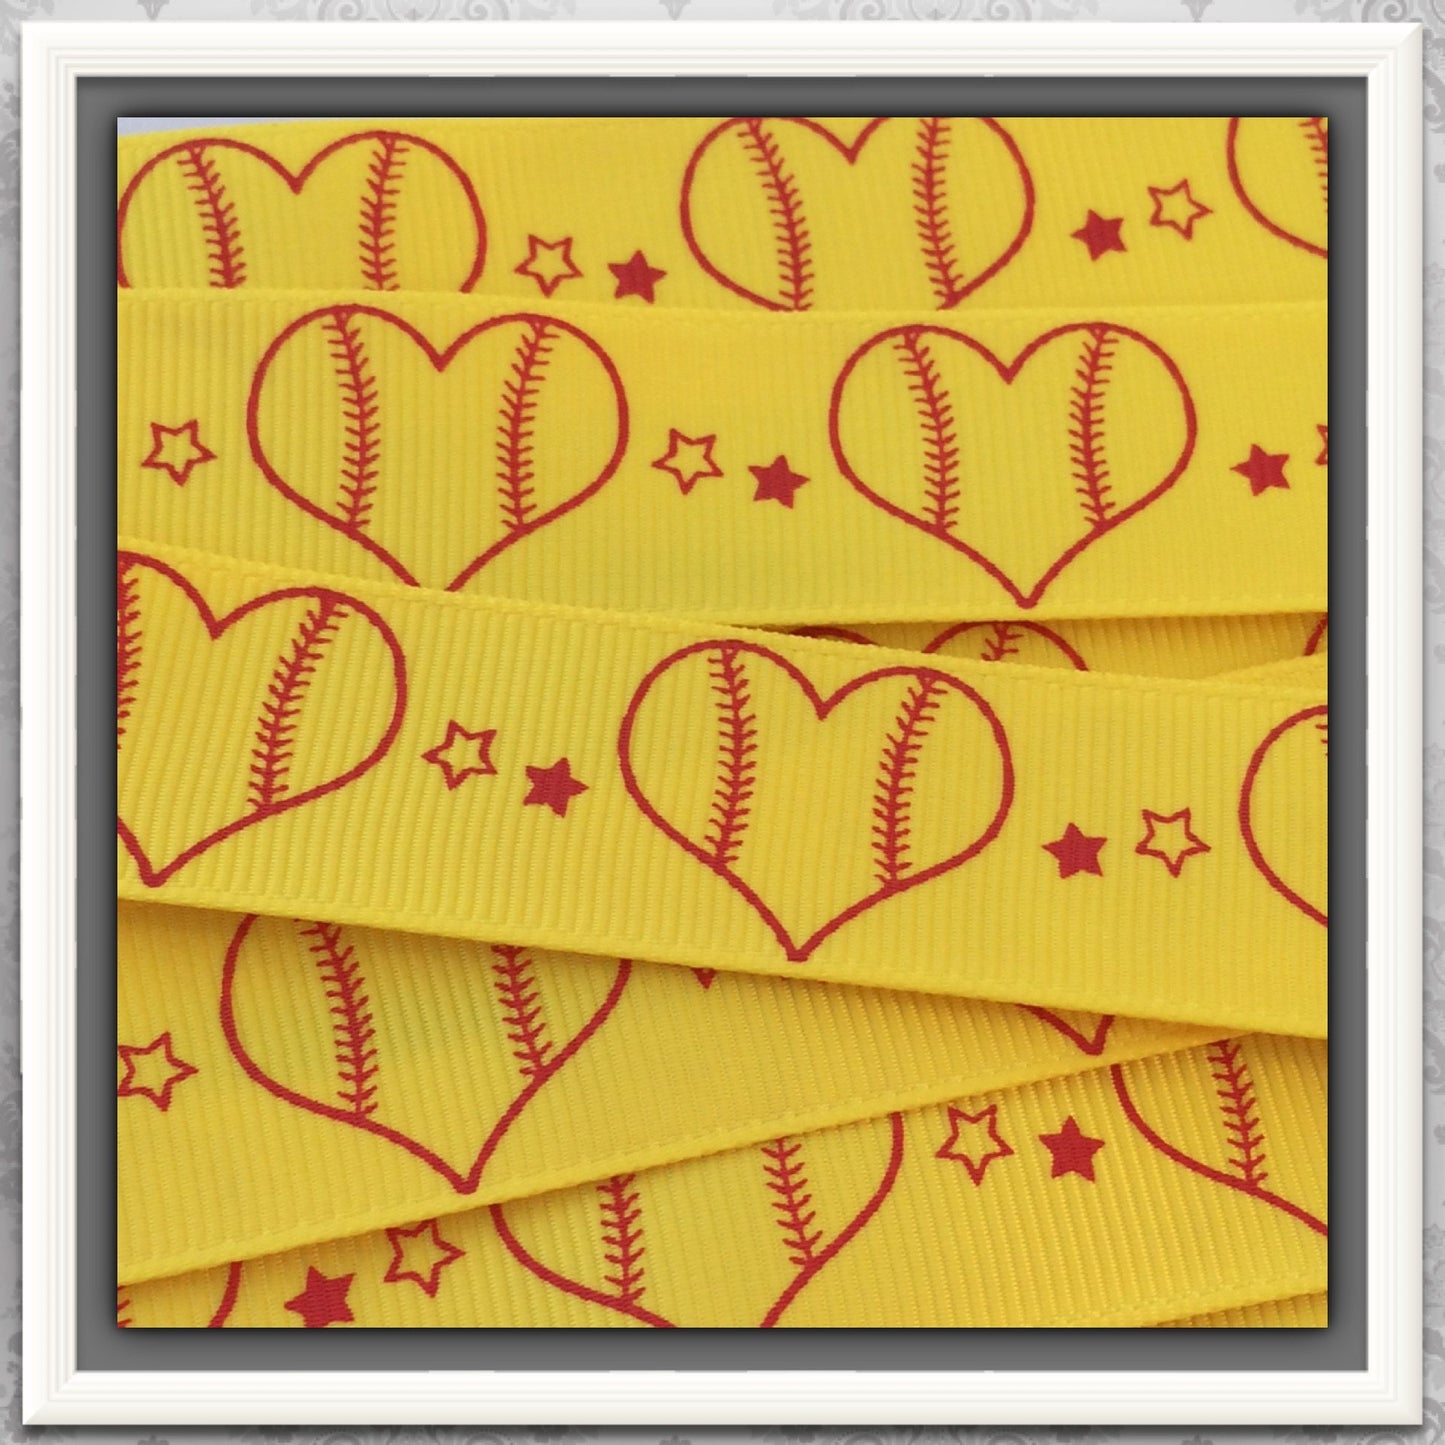 Baseball Hearts in Softball Red ink on Yellow GG 5 yds 7/8" TWRH